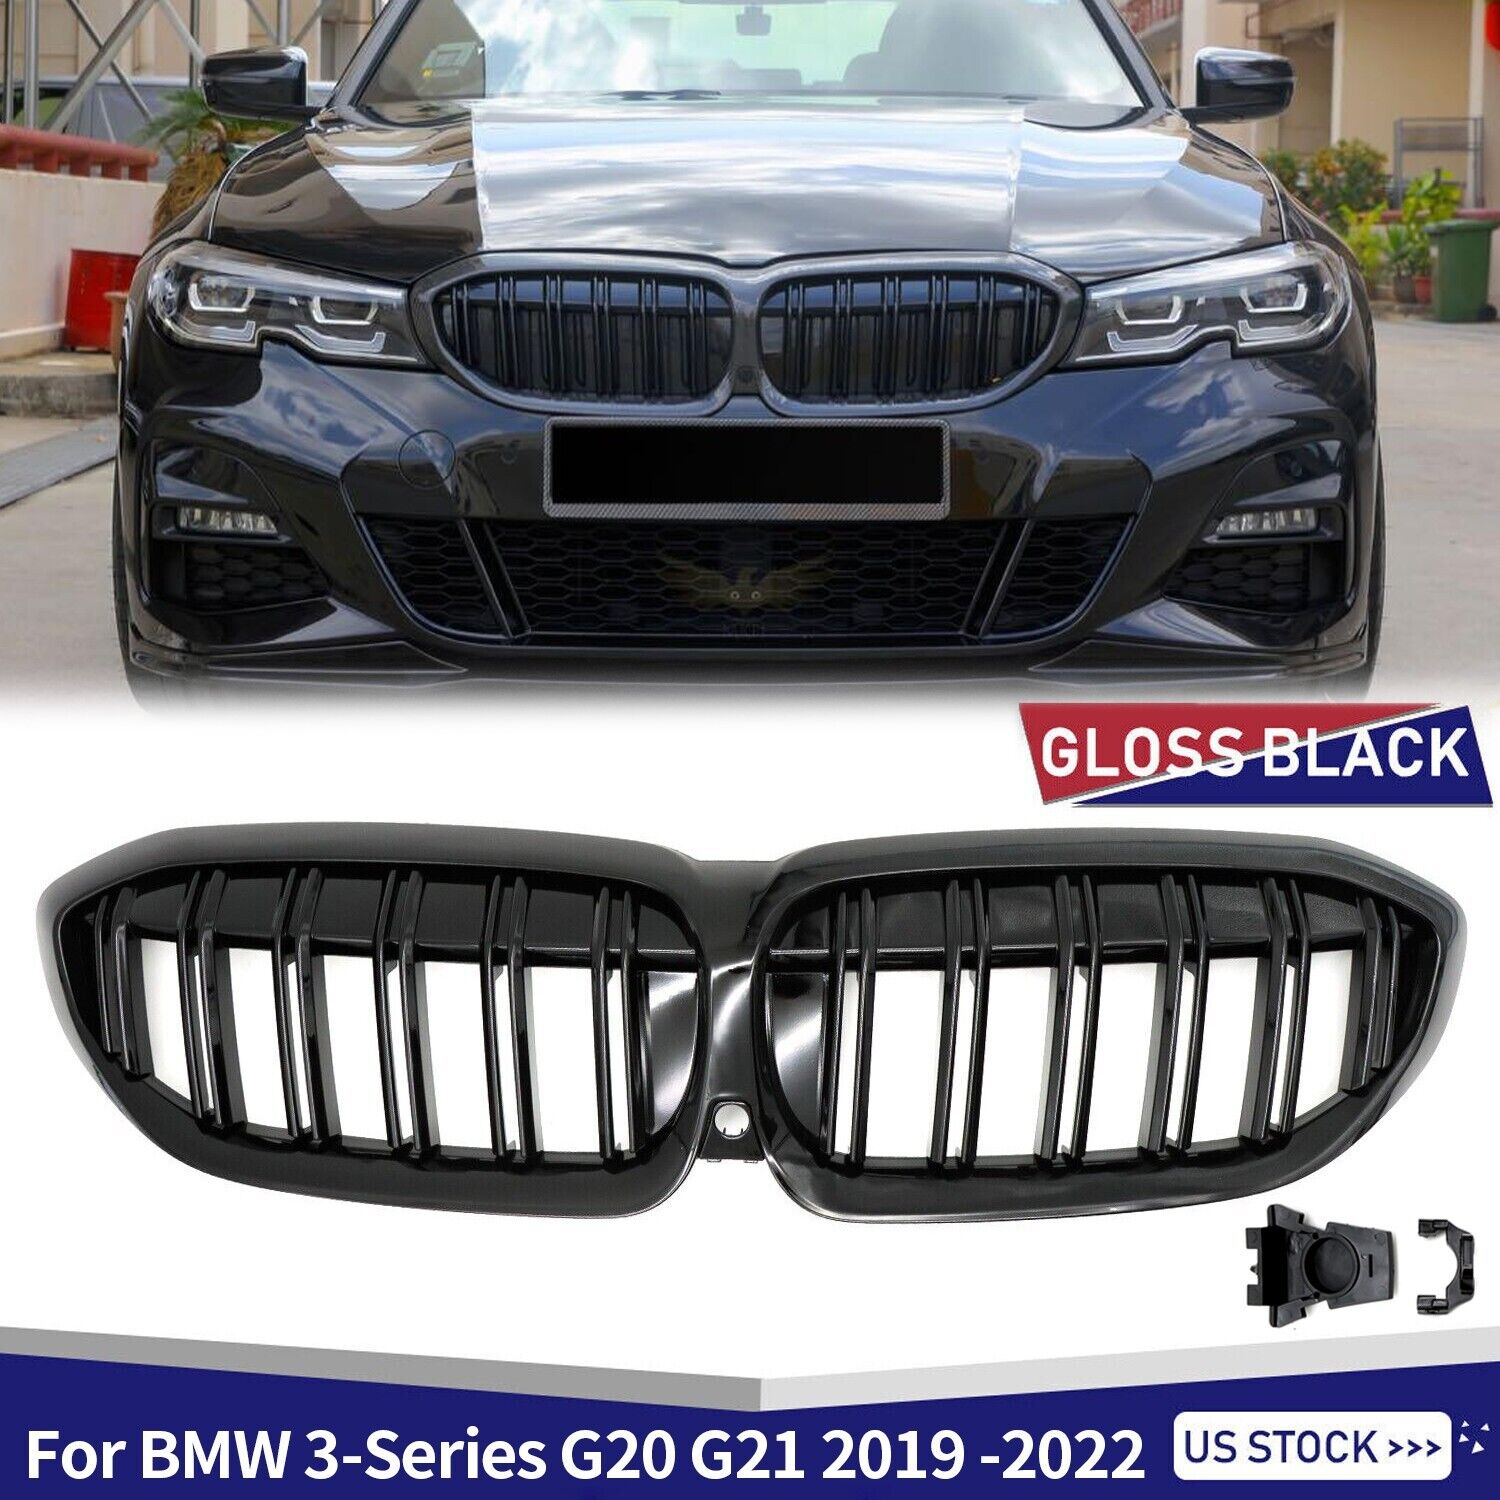 For BMW G20 G21 3-Series 330i 2019 -2022 Front Bumper Kidney Grills Gloss Black